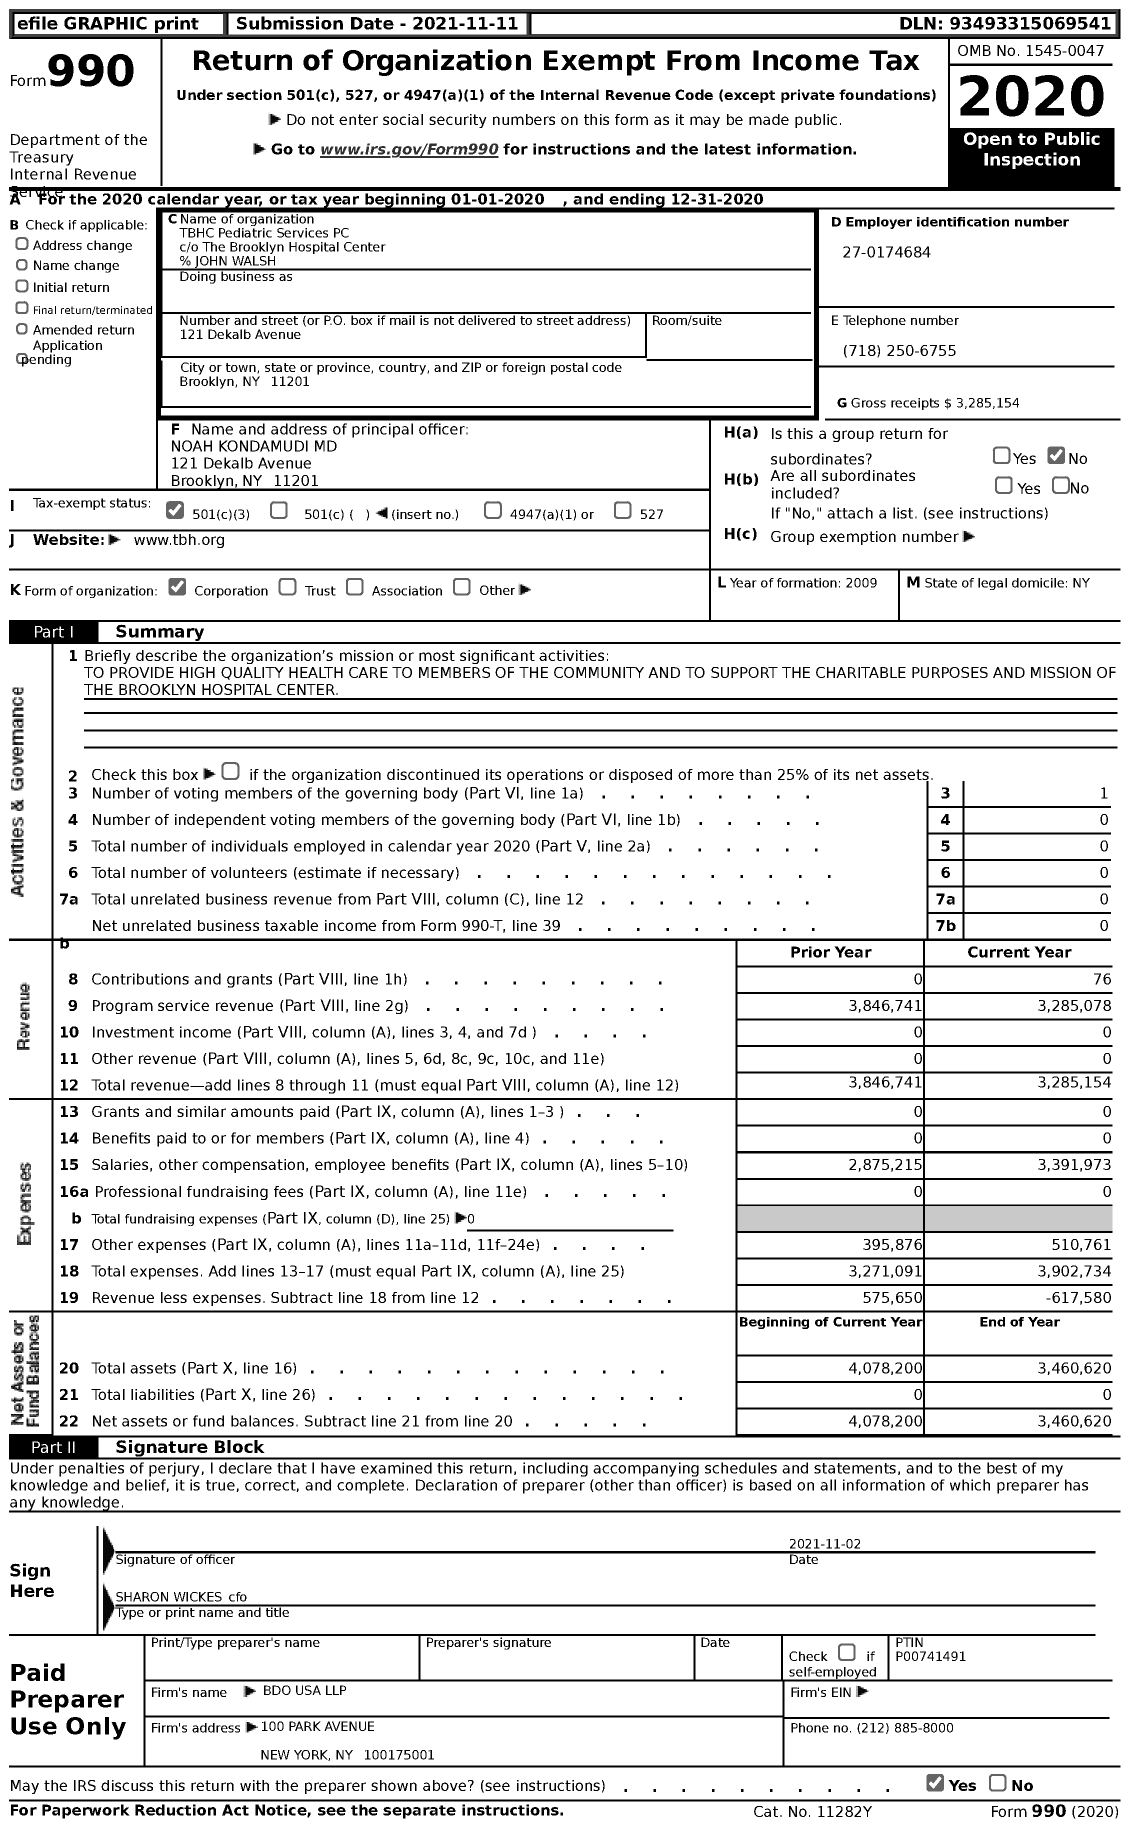 Image of first page of 2020 Form 990 for TBHC Pediatric Services